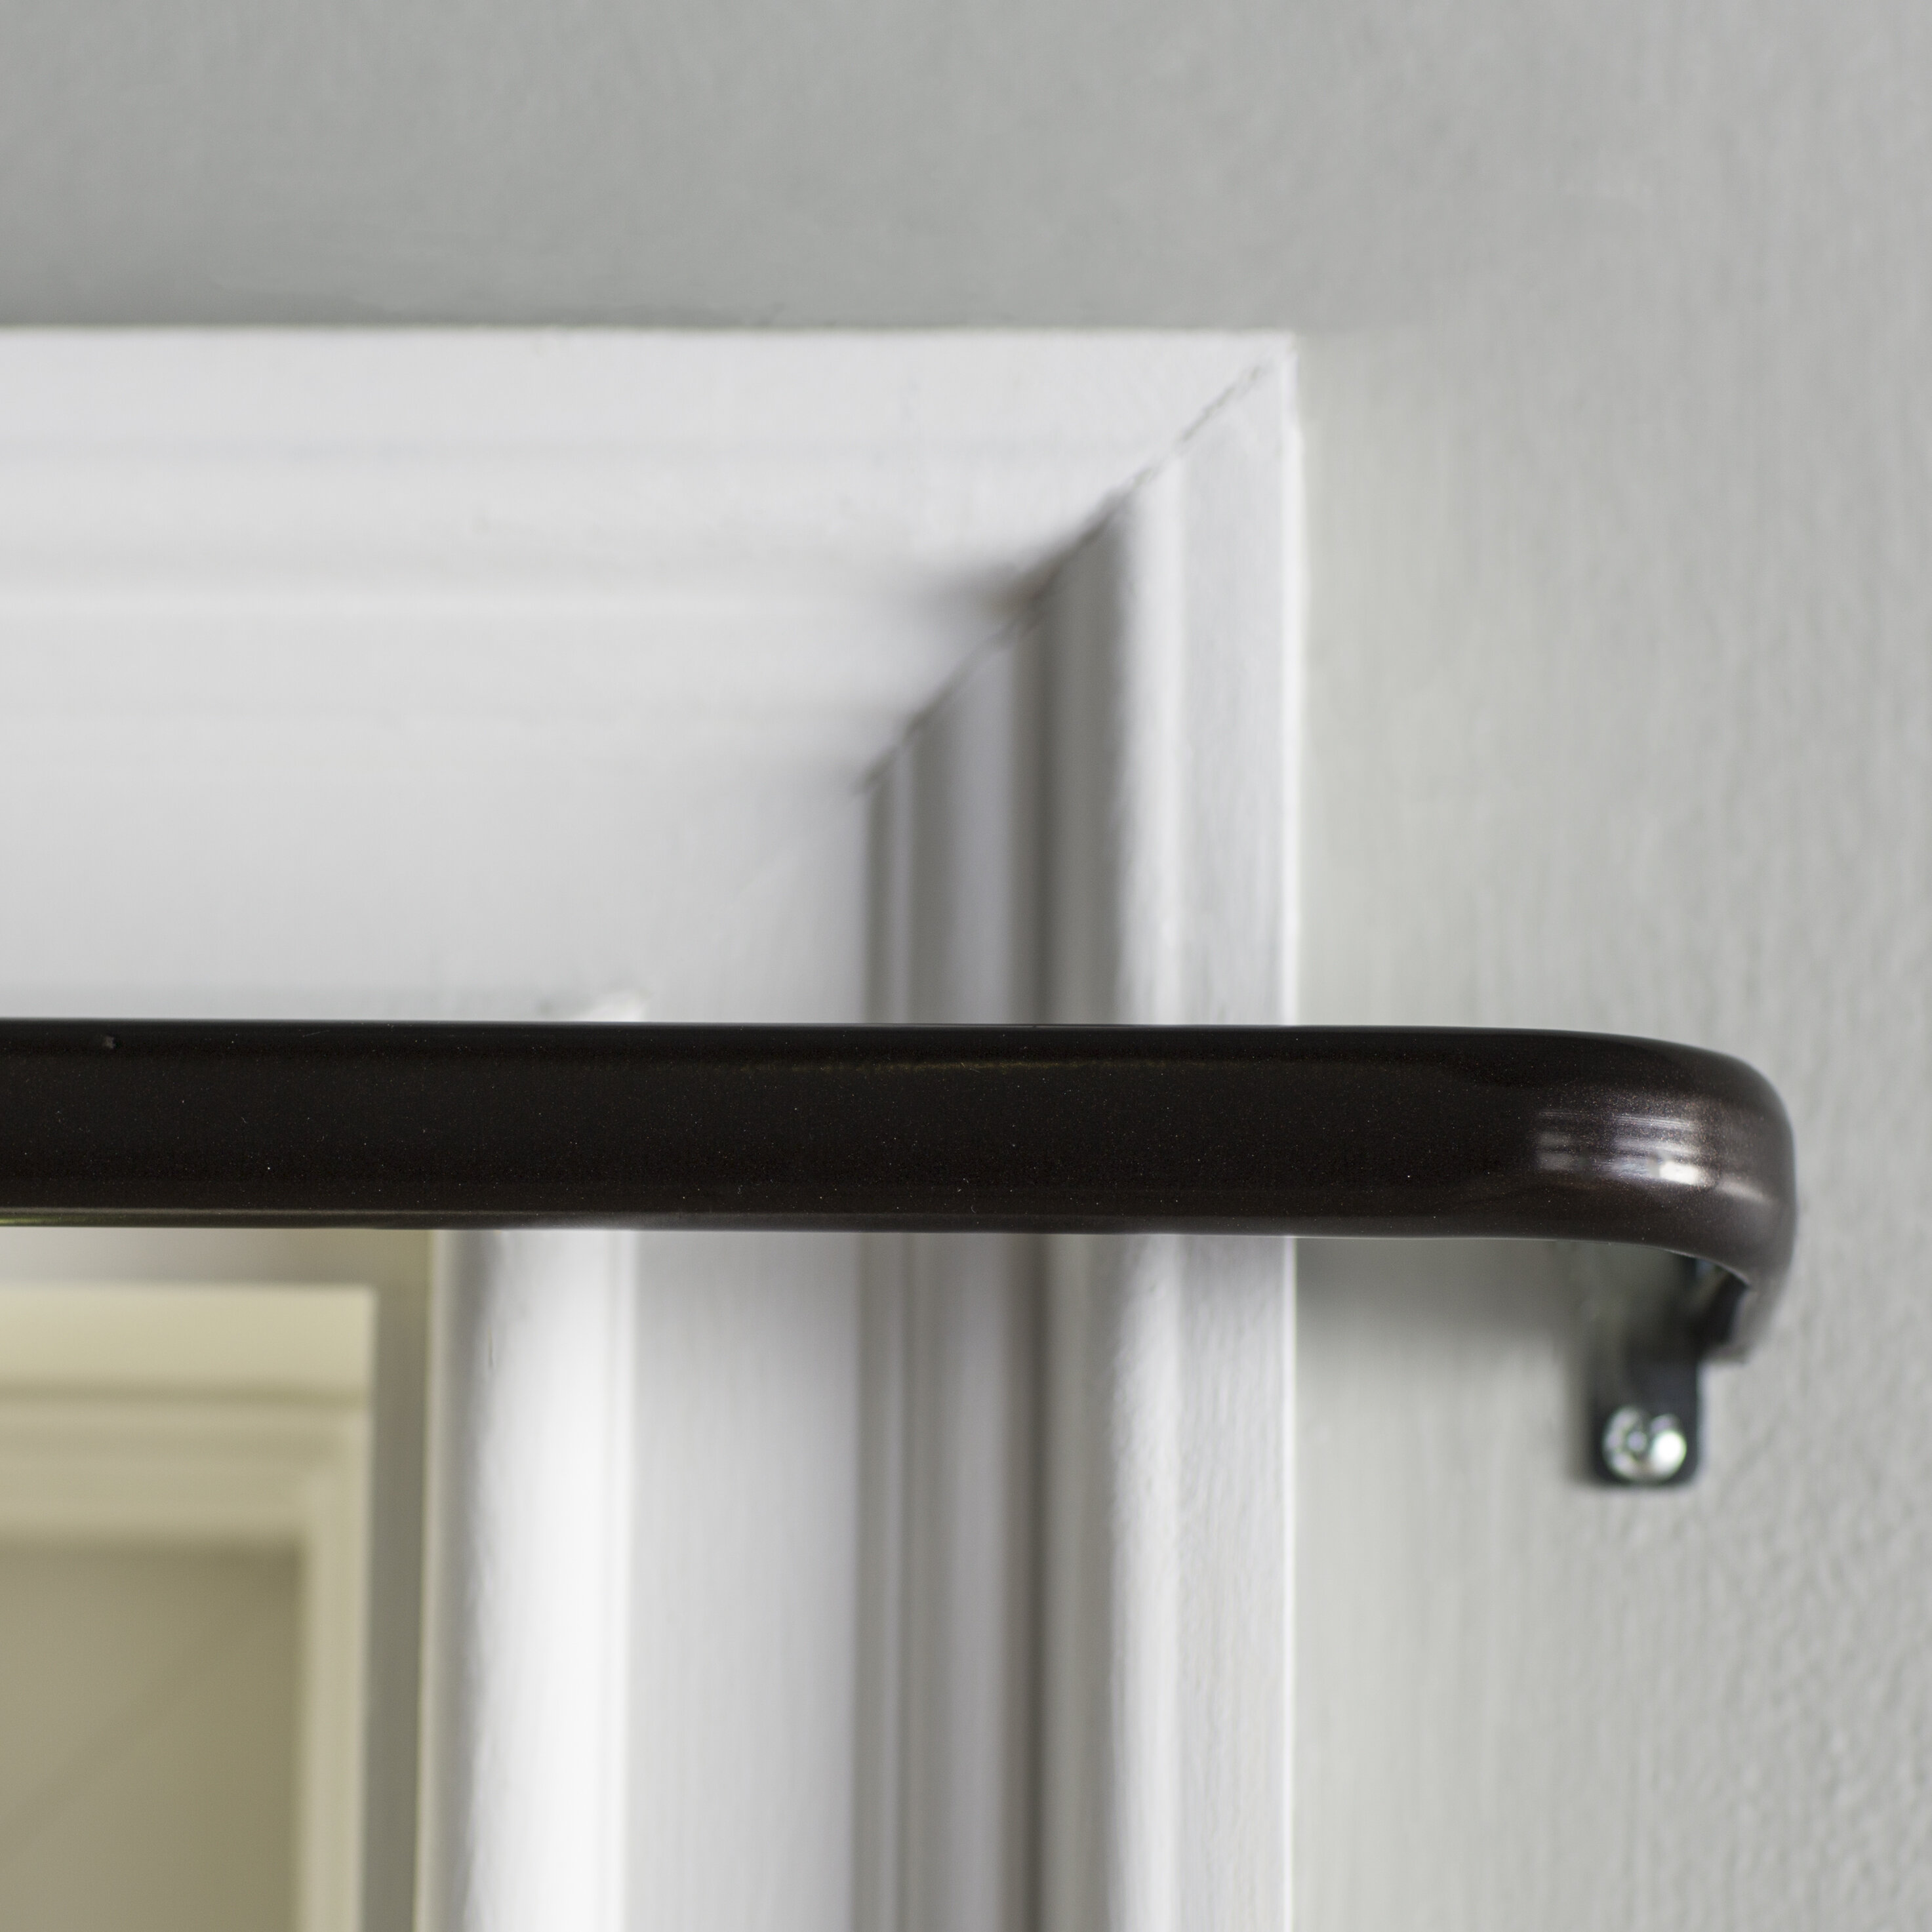 Swathe Curtain Rod 1" OD #10-30 choose from 3 colors and 5 sizes 